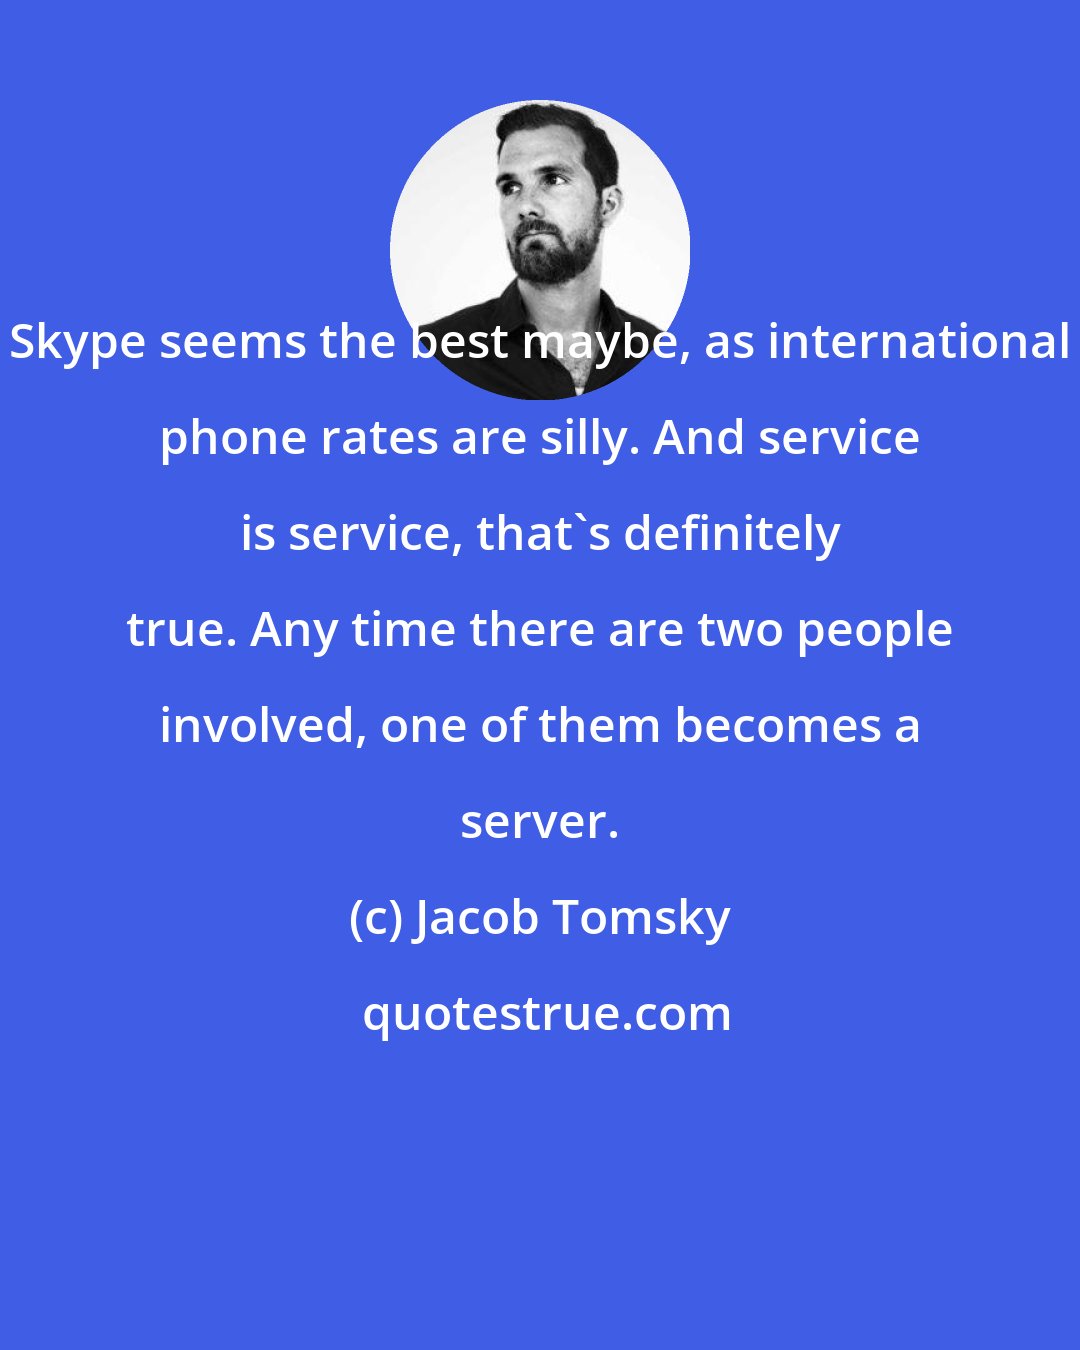 Jacob Tomsky: Skype seems the best maybe, as international phone rates are silly. And service is service, that's definitely true. Any time there are two people involved, one of them becomes a server.